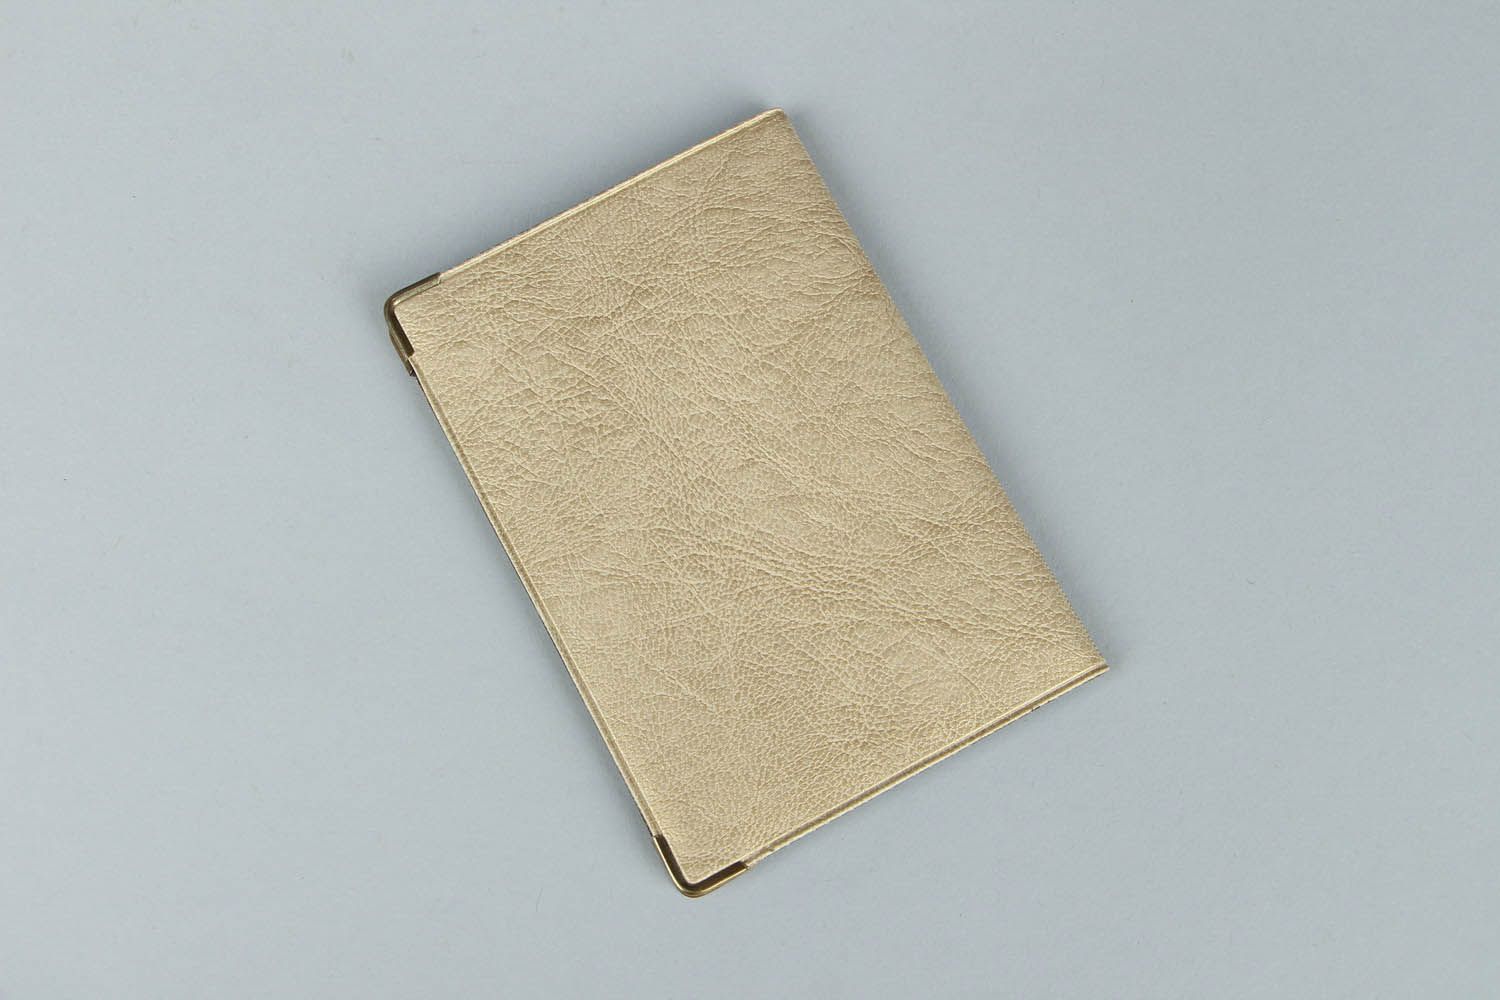 Passport cover made of leatherette photo 3